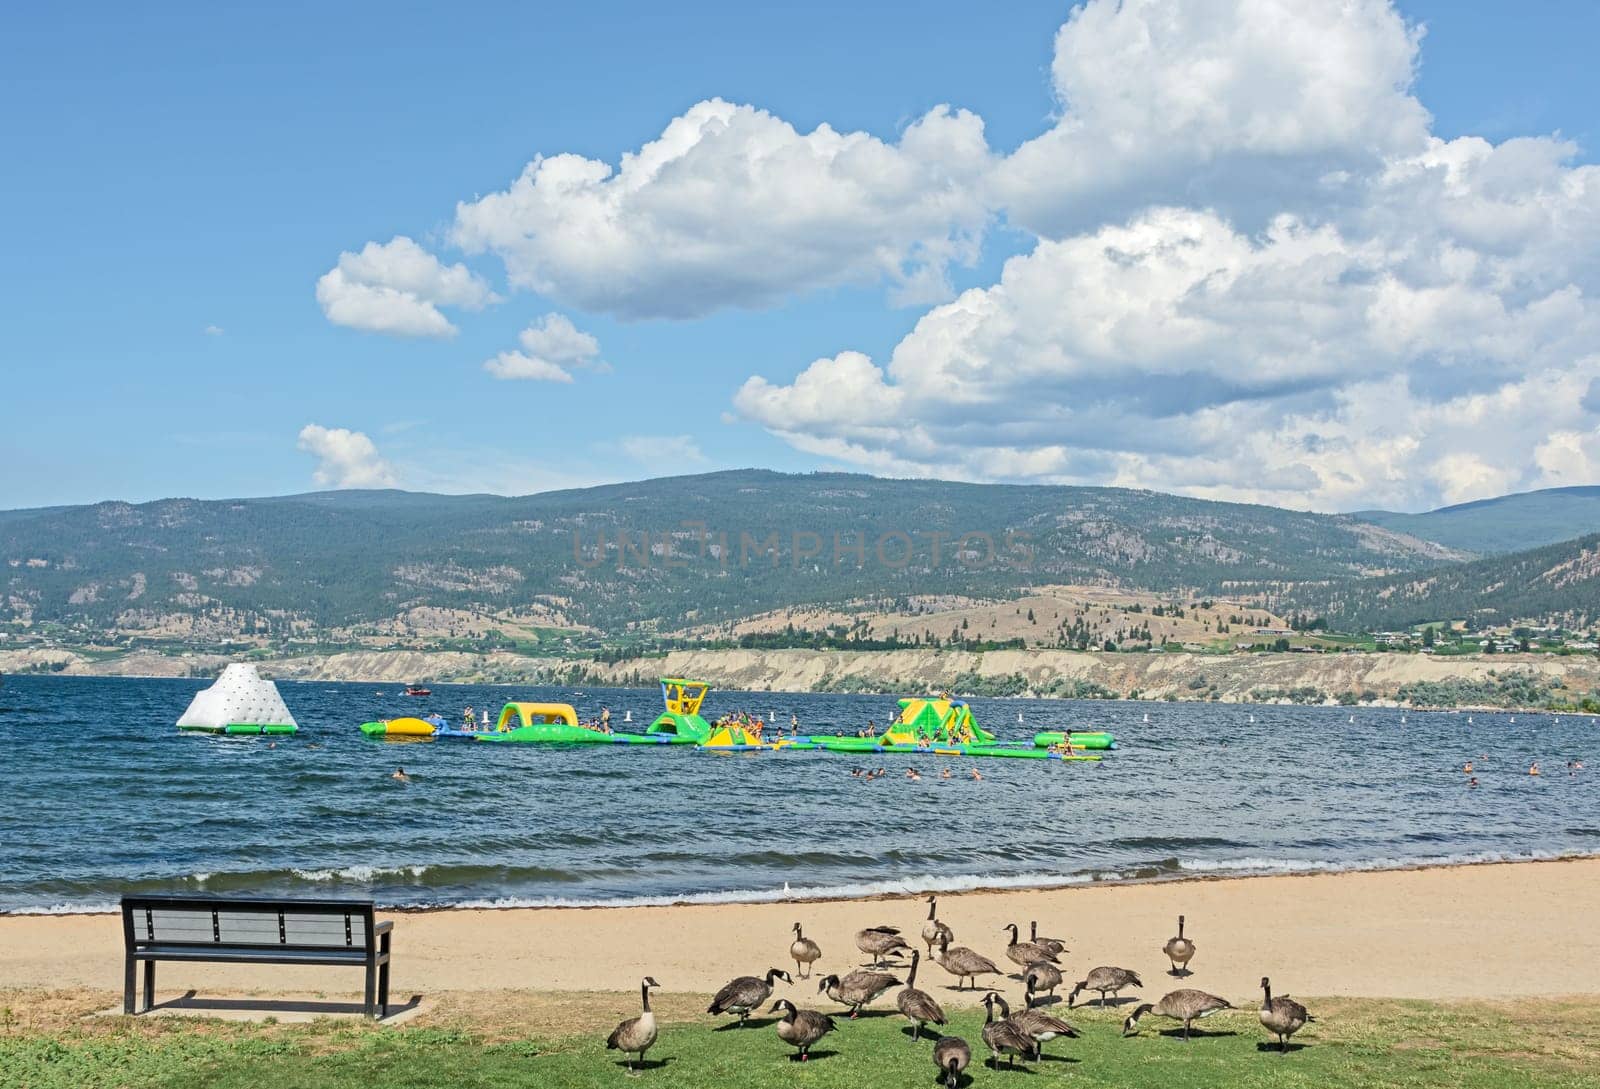 Sand beach and water soaking attraction on Okanagan lake by Imagenet